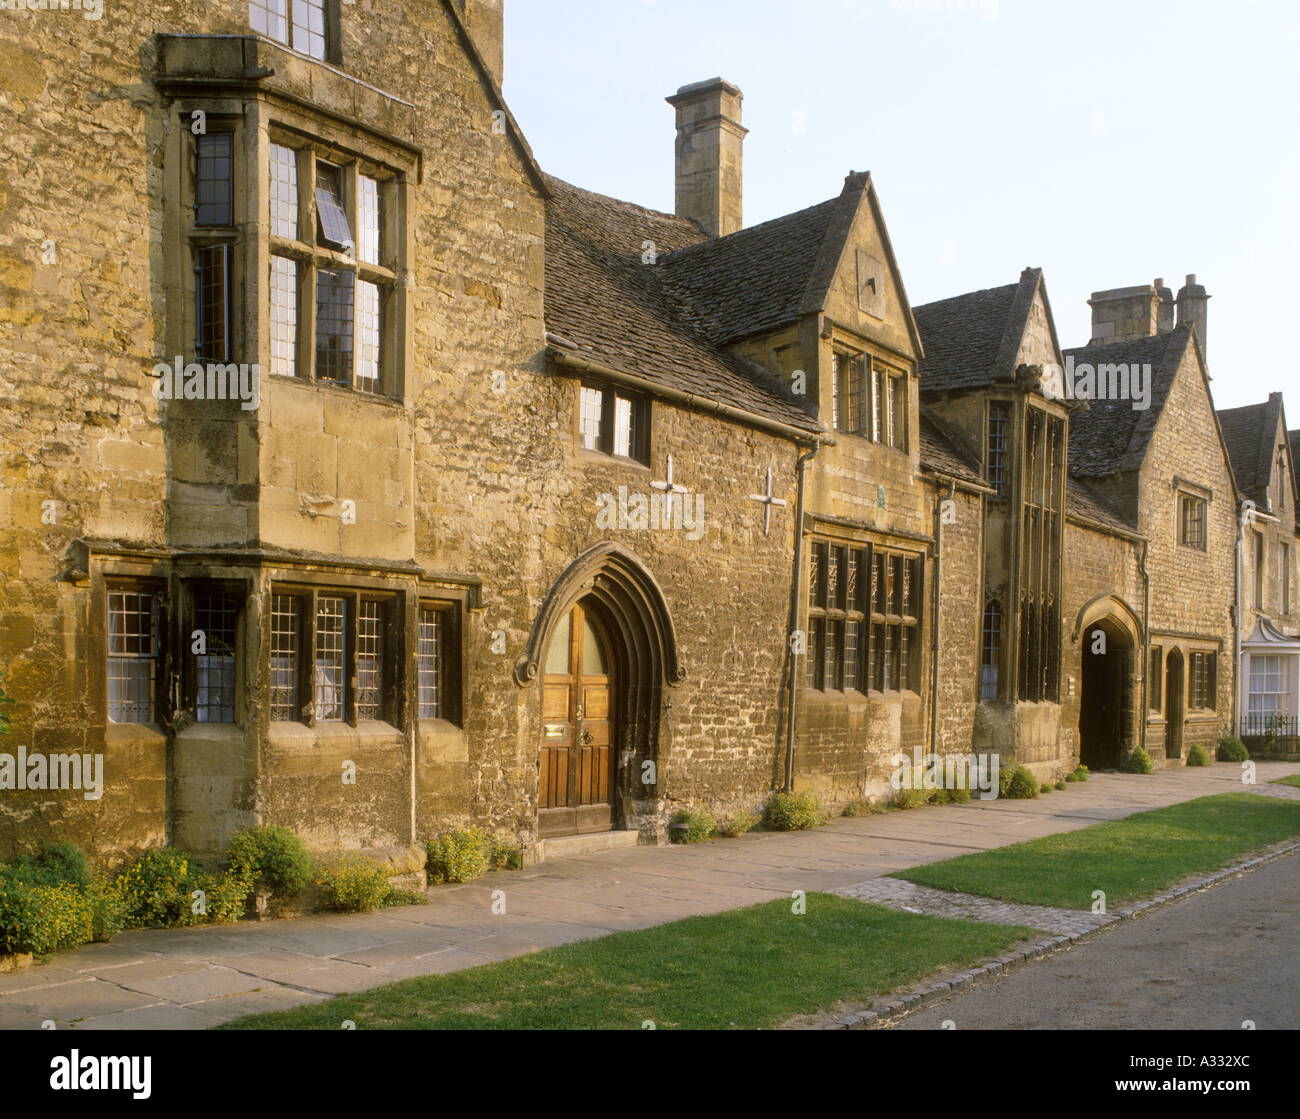 William Grevel's House in the High Street of the Cotswold town of Chipping Campden, Gloucestershire Stock Photo